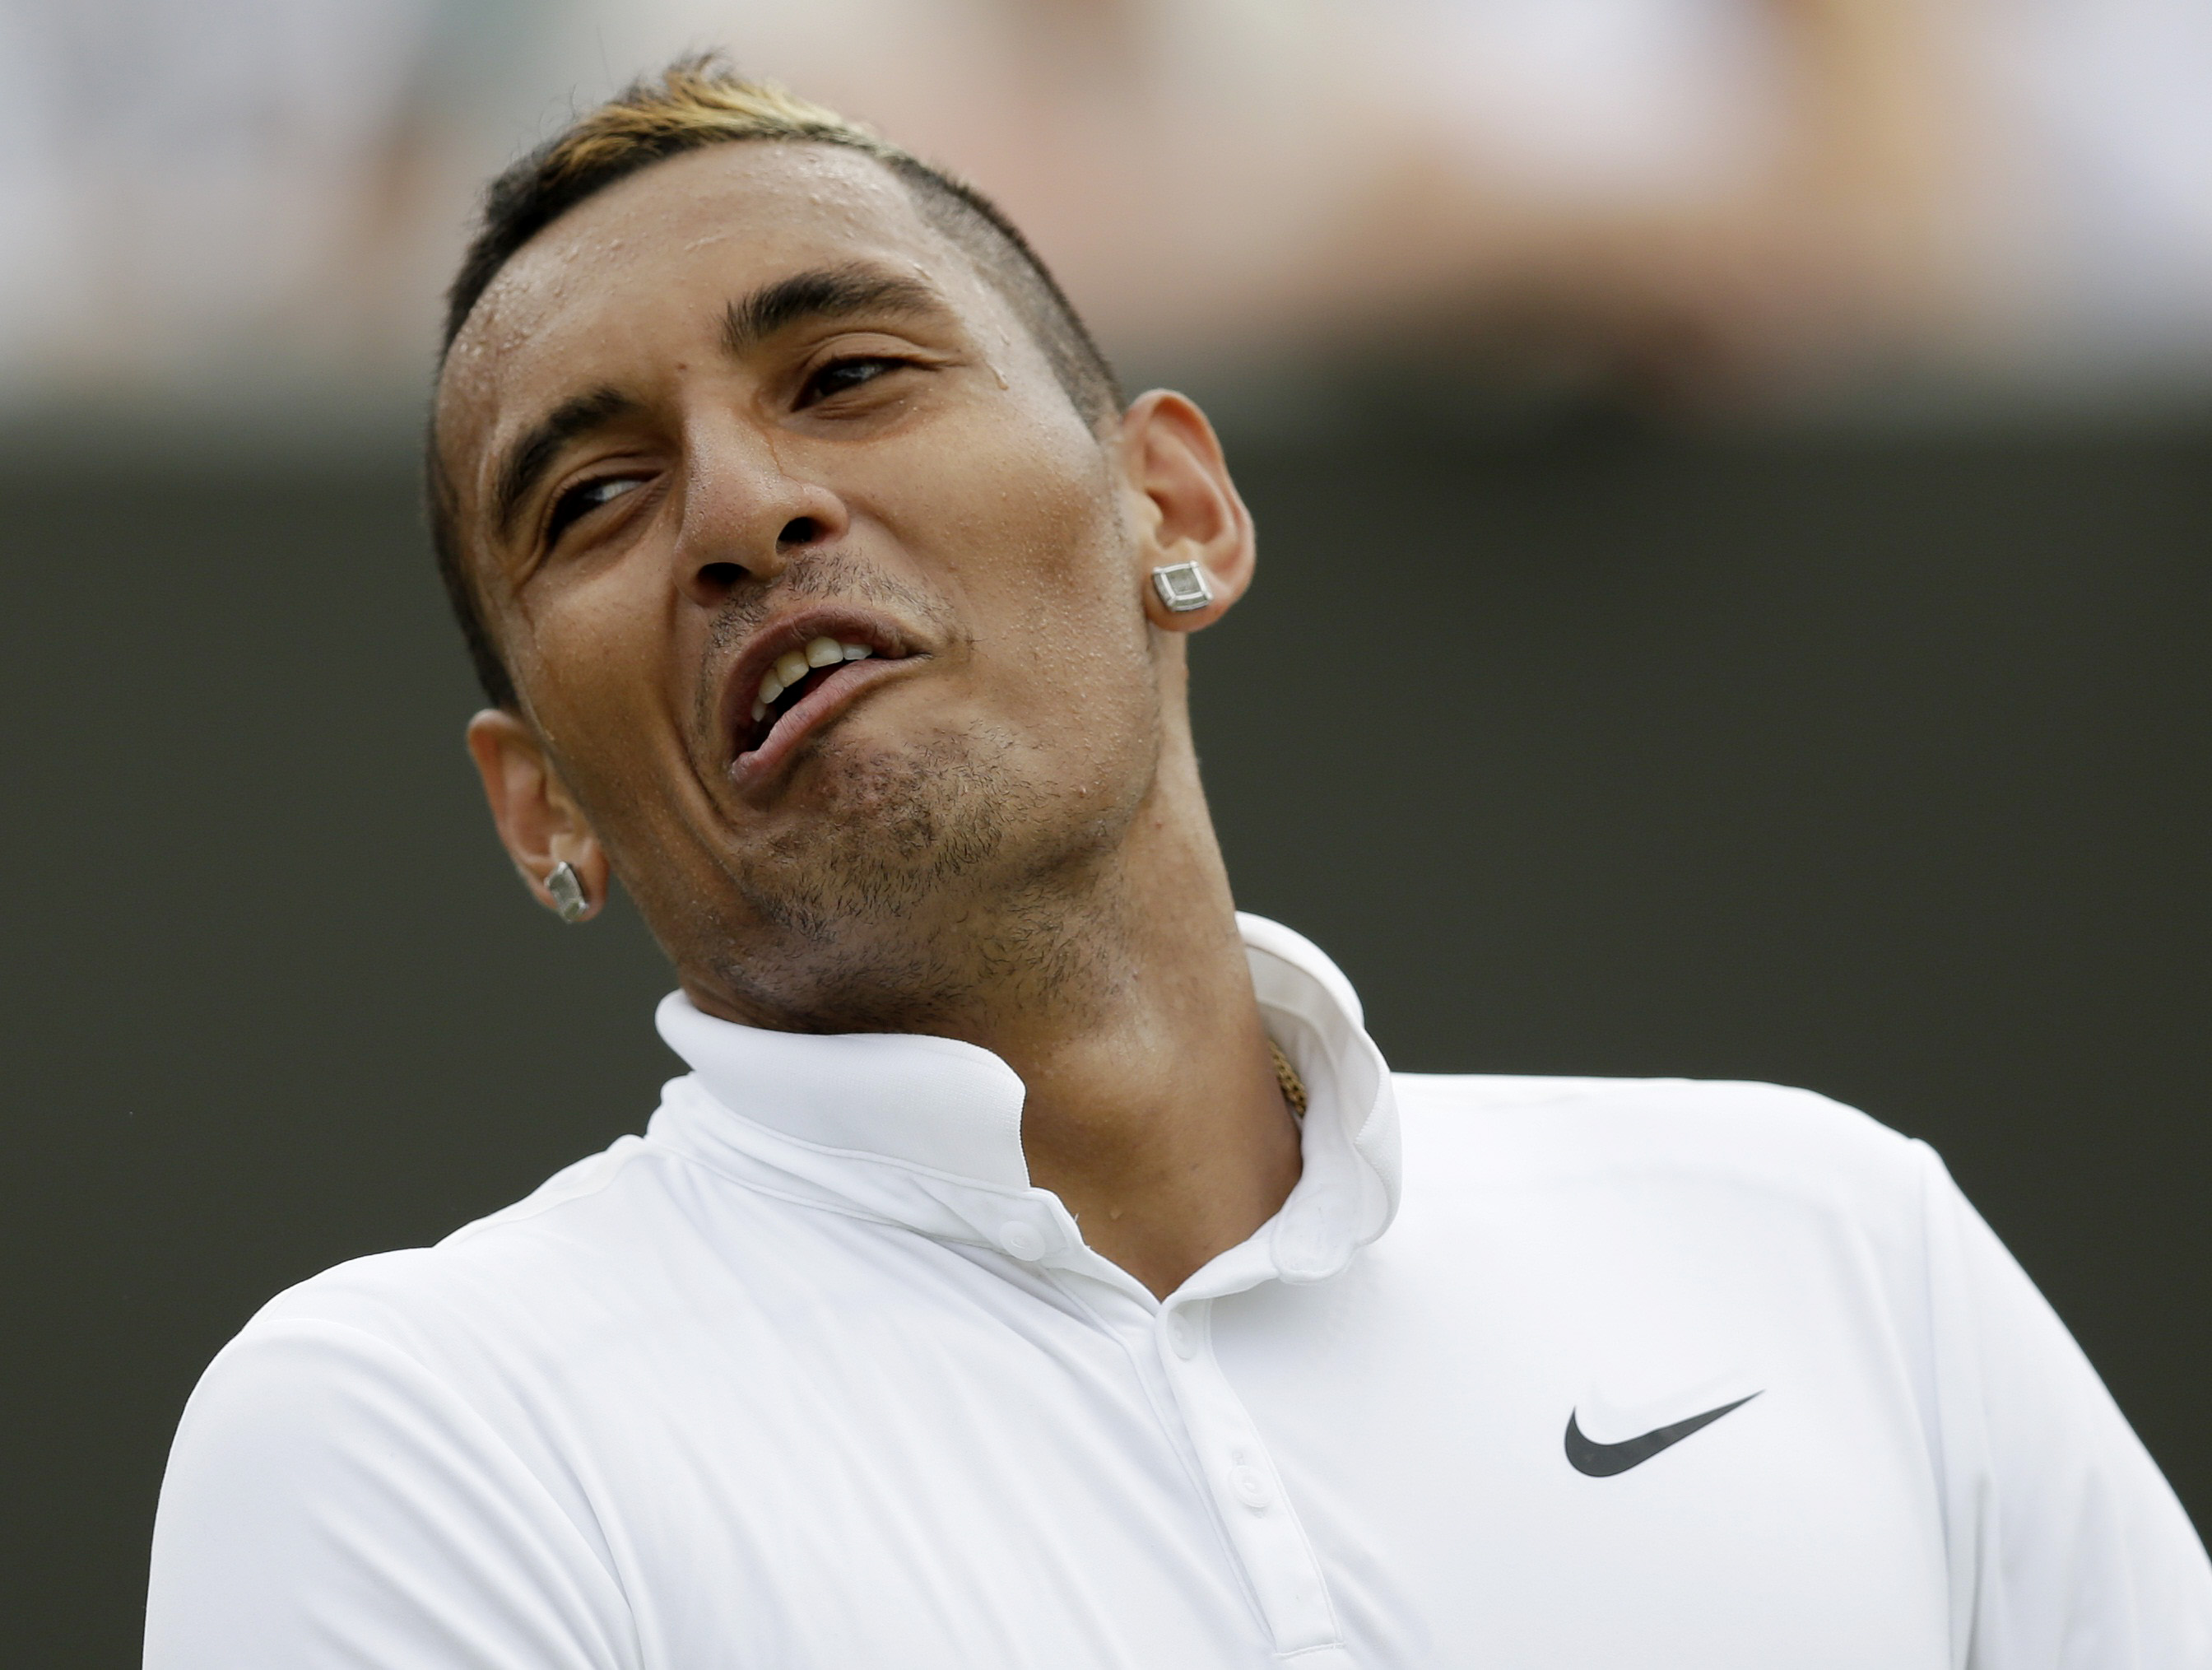 Nick Kyrgios was involved in heated exchanges with reporters. Photo: AFP